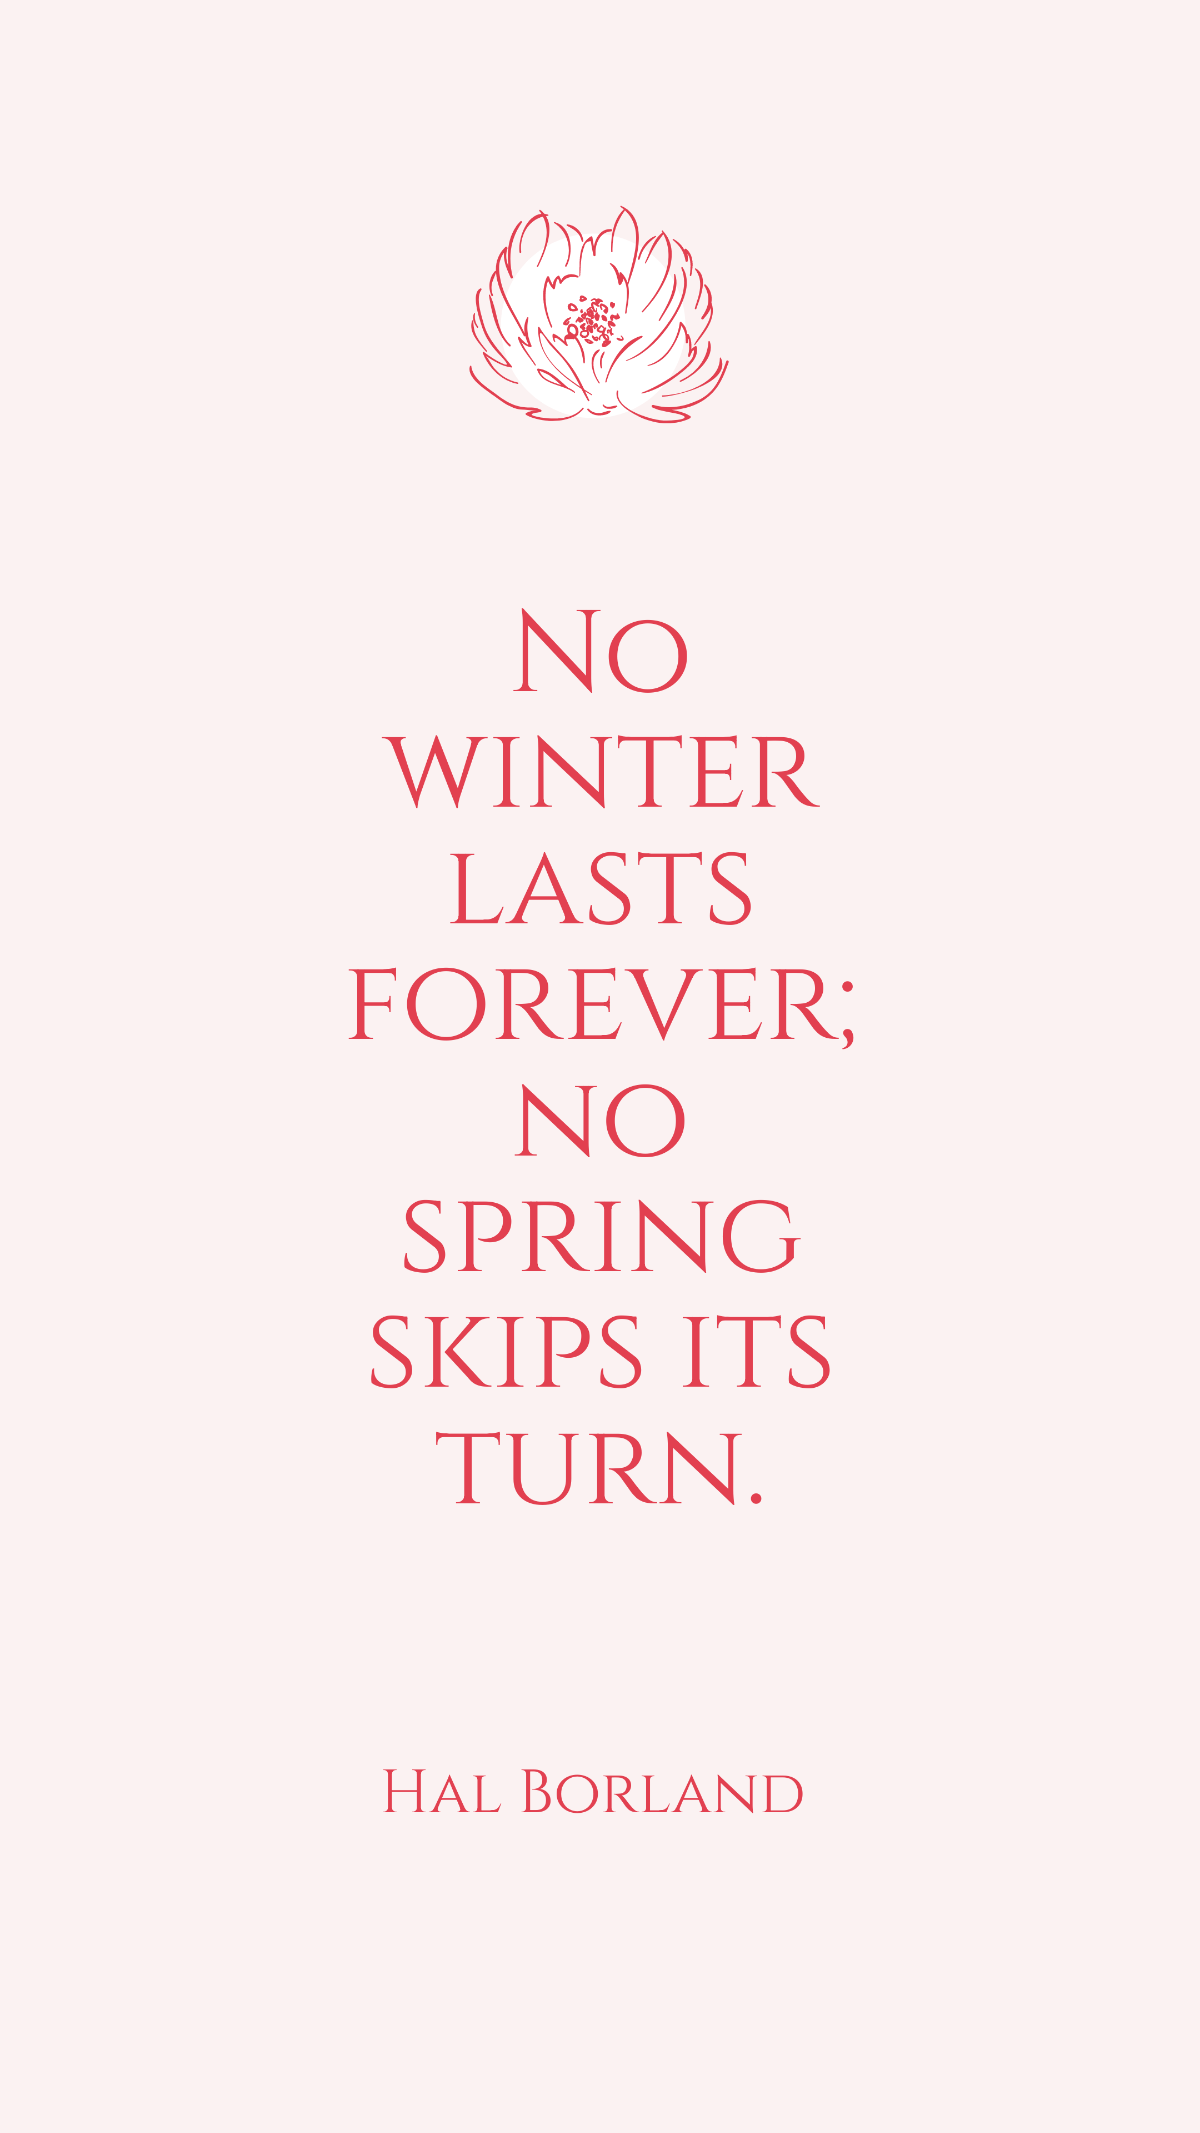 Hal Borland - No winter lasts forever; no spring skips its turn. Template